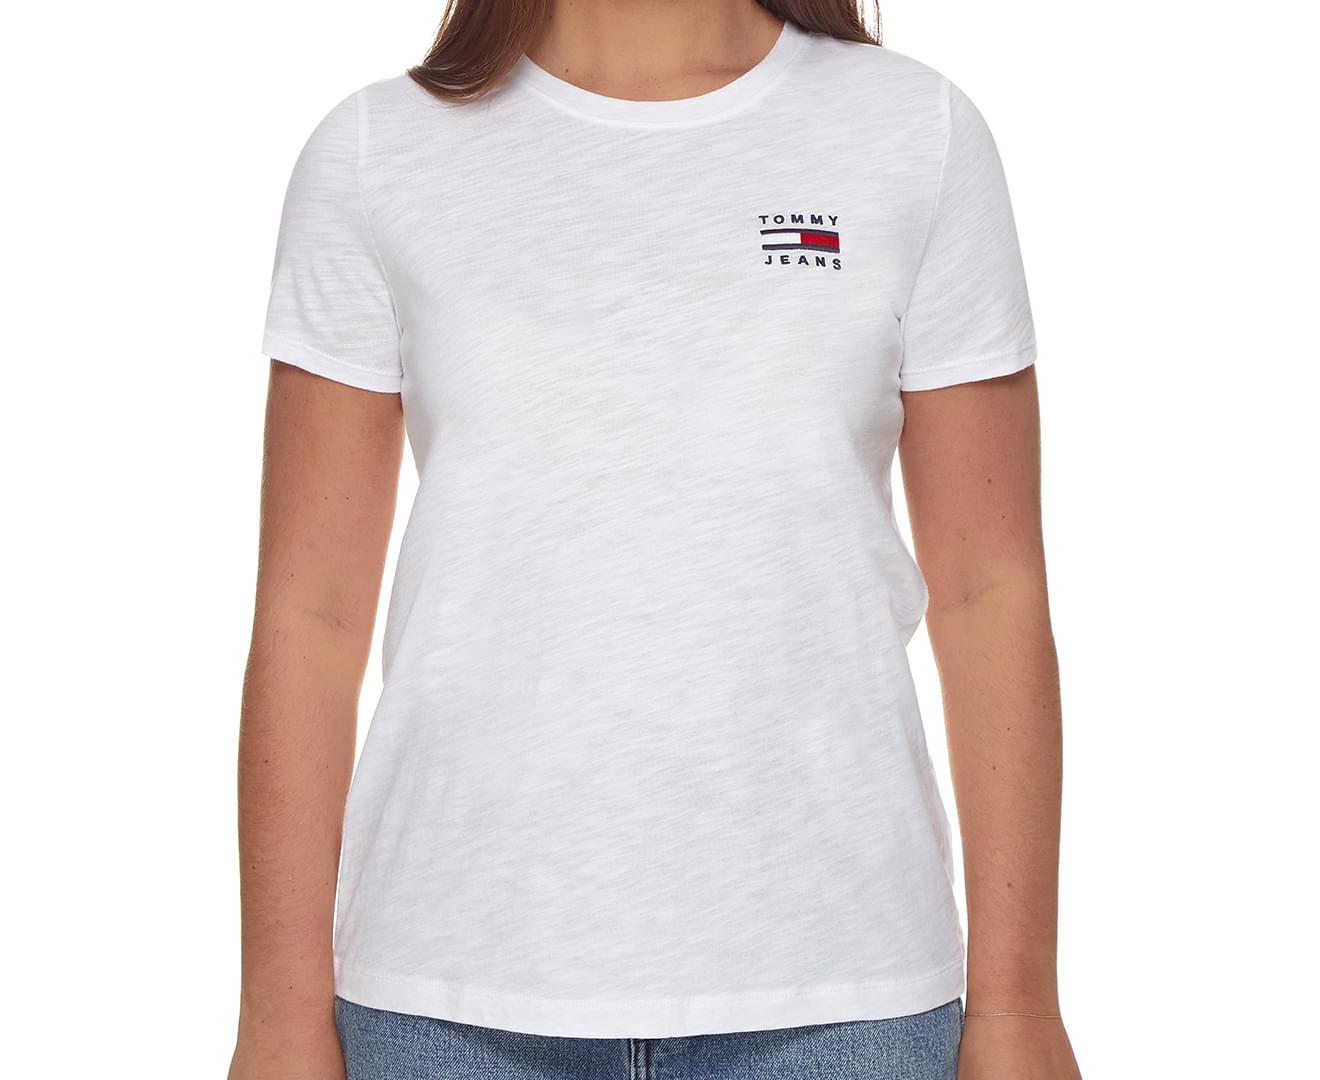 TOMMY HILFIGER Tommy Jeans Women's Small Embroidered Logo White T-shirt